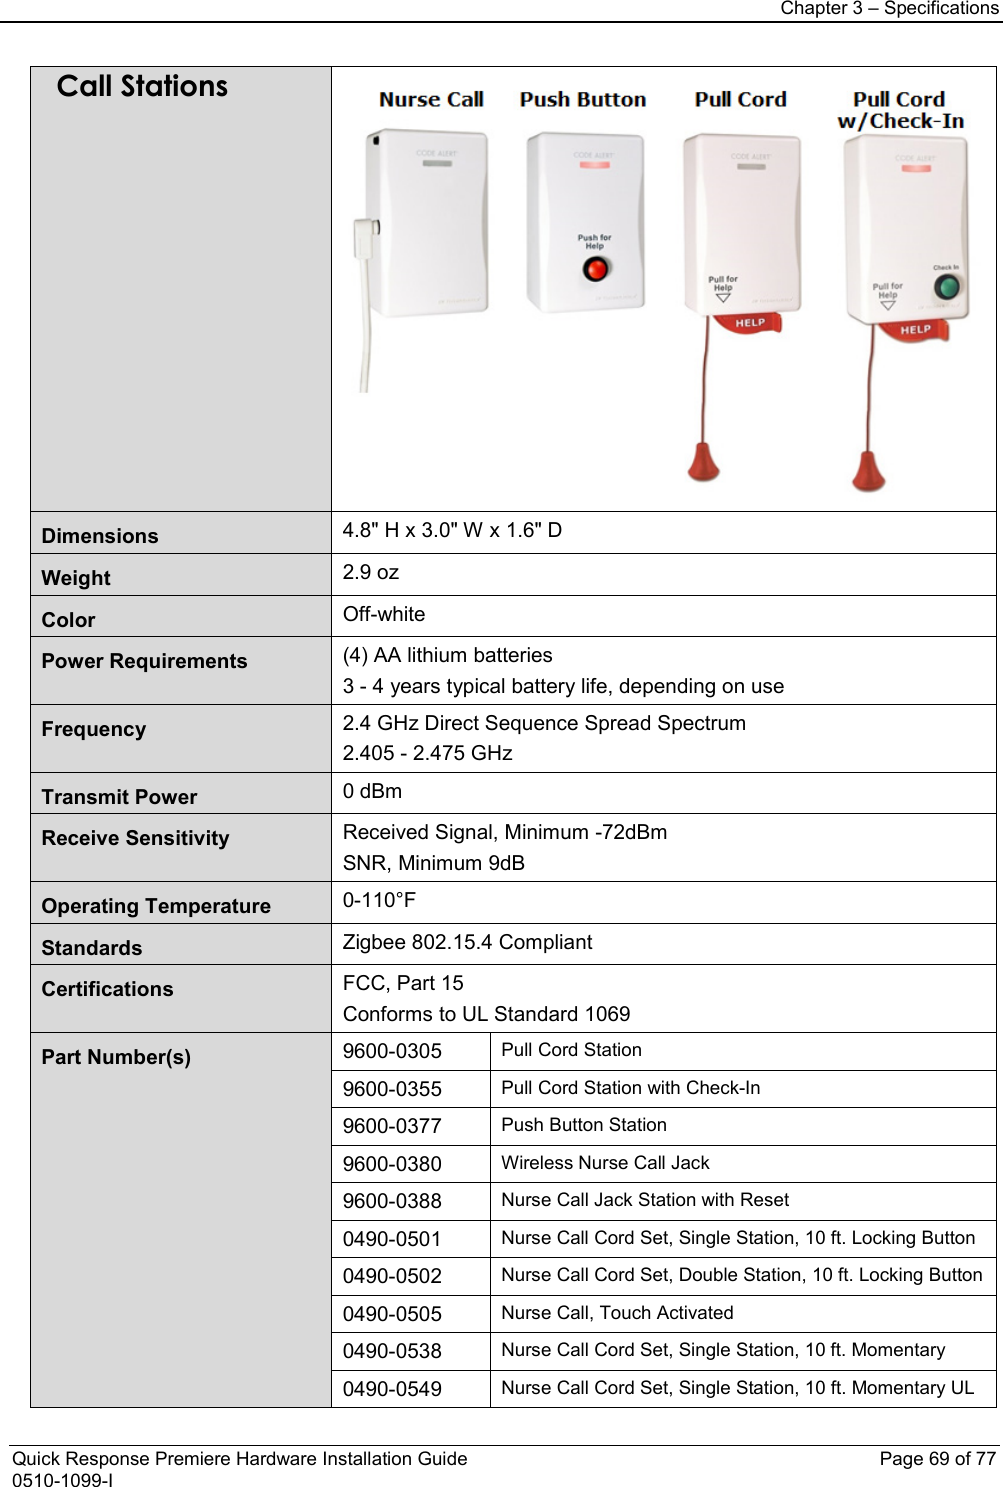 Chapter 3 – Specifications  Quick Response Premiere Hardware Installation Guide    Page 69 of 77 0510-1099-I Call Stations  Dimensions 4.8&quot; H x 3.0&quot; W x 1.6&quot; D Weight 2.9 oz  Color Off-white Power Requirements (4) AA lithium batteries 3 - 4 years typical battery life, depending on use Frequency  2.4 GHz Direct Sequence Spread Spectrum 2.405 - 2.475 GHz Transmit Power 0 dBm Receive Sensitivity Received Signal, Minimum -72dBm SNR, Minimum 9dB Operating Temperature 0-110°F Standards Zigbee 802.15.4 Compliant Certifications FCC, Part 15 Conforms to UL Standard 1069 Part Number(s)  9600-0305 Pull Cord Station 9600-0355 Pull Cord Station with Check-In 9600-0377 Push Button Station 9600-0380 Wireless Nurse Call Jack  9600-0388 Nurse Call Jack Station with Reset 0490-0501 Nurse Call Cord Set, Single Station, 10 ft. Locking Button 0490-0502 Nurse Call Cord Set, Double Station, 10 ft. Locking Button 0490-0505 Nurse Call, Touch Activated 0490-0538 Nurse Call Cord Set, Single Station, 10 ft. Momentary 0490-0549 Nurse Call Cord Set, Single Station, 10 ft. Momentary UL  